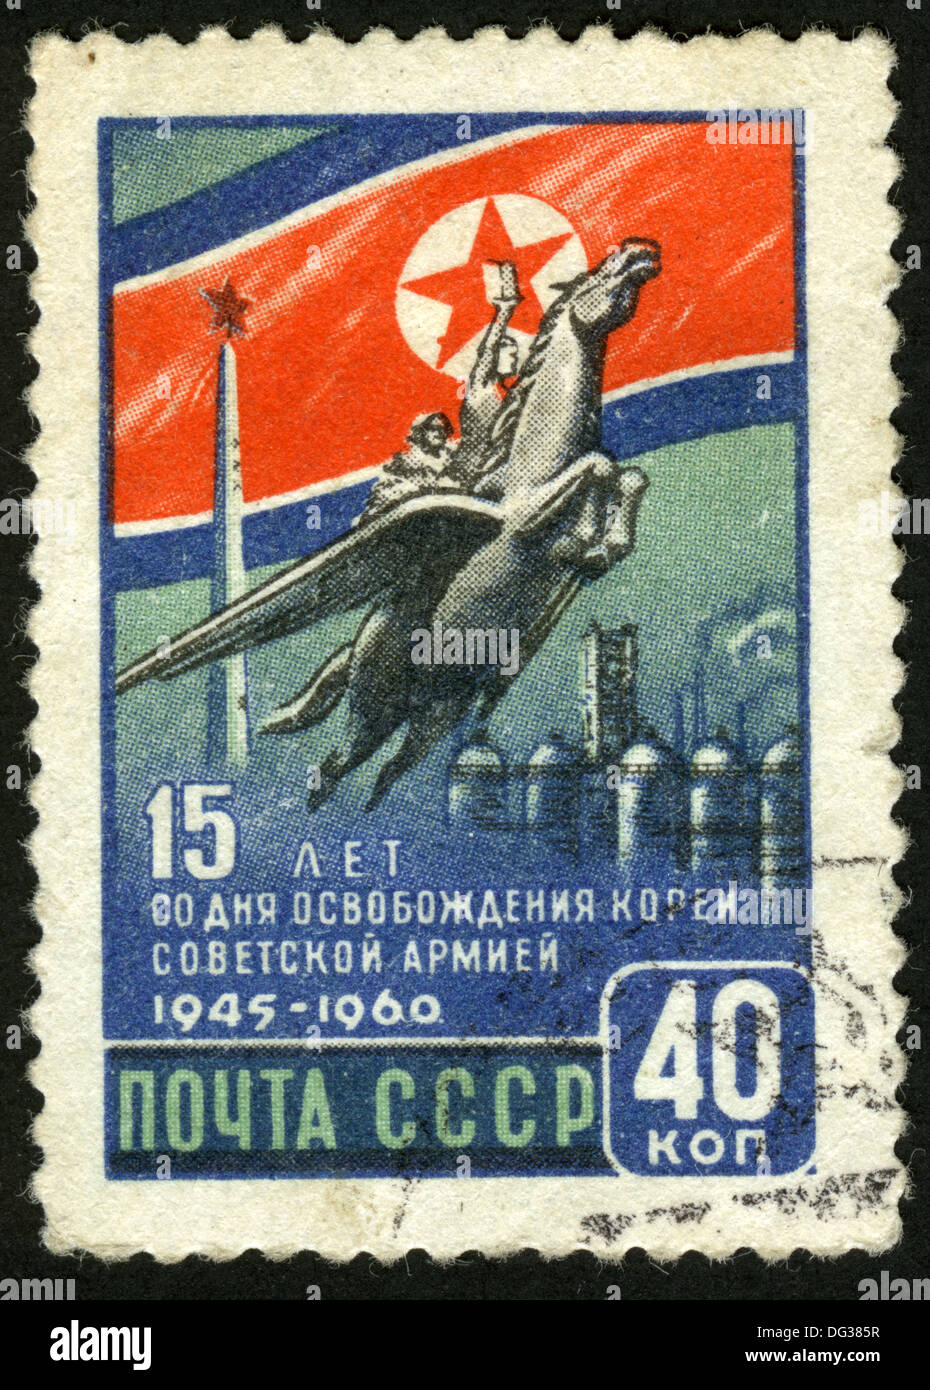 USSR, 1960 year,post mark,stamp,15th anniversary of Korea's liberation by the Soviet army Stock Photo